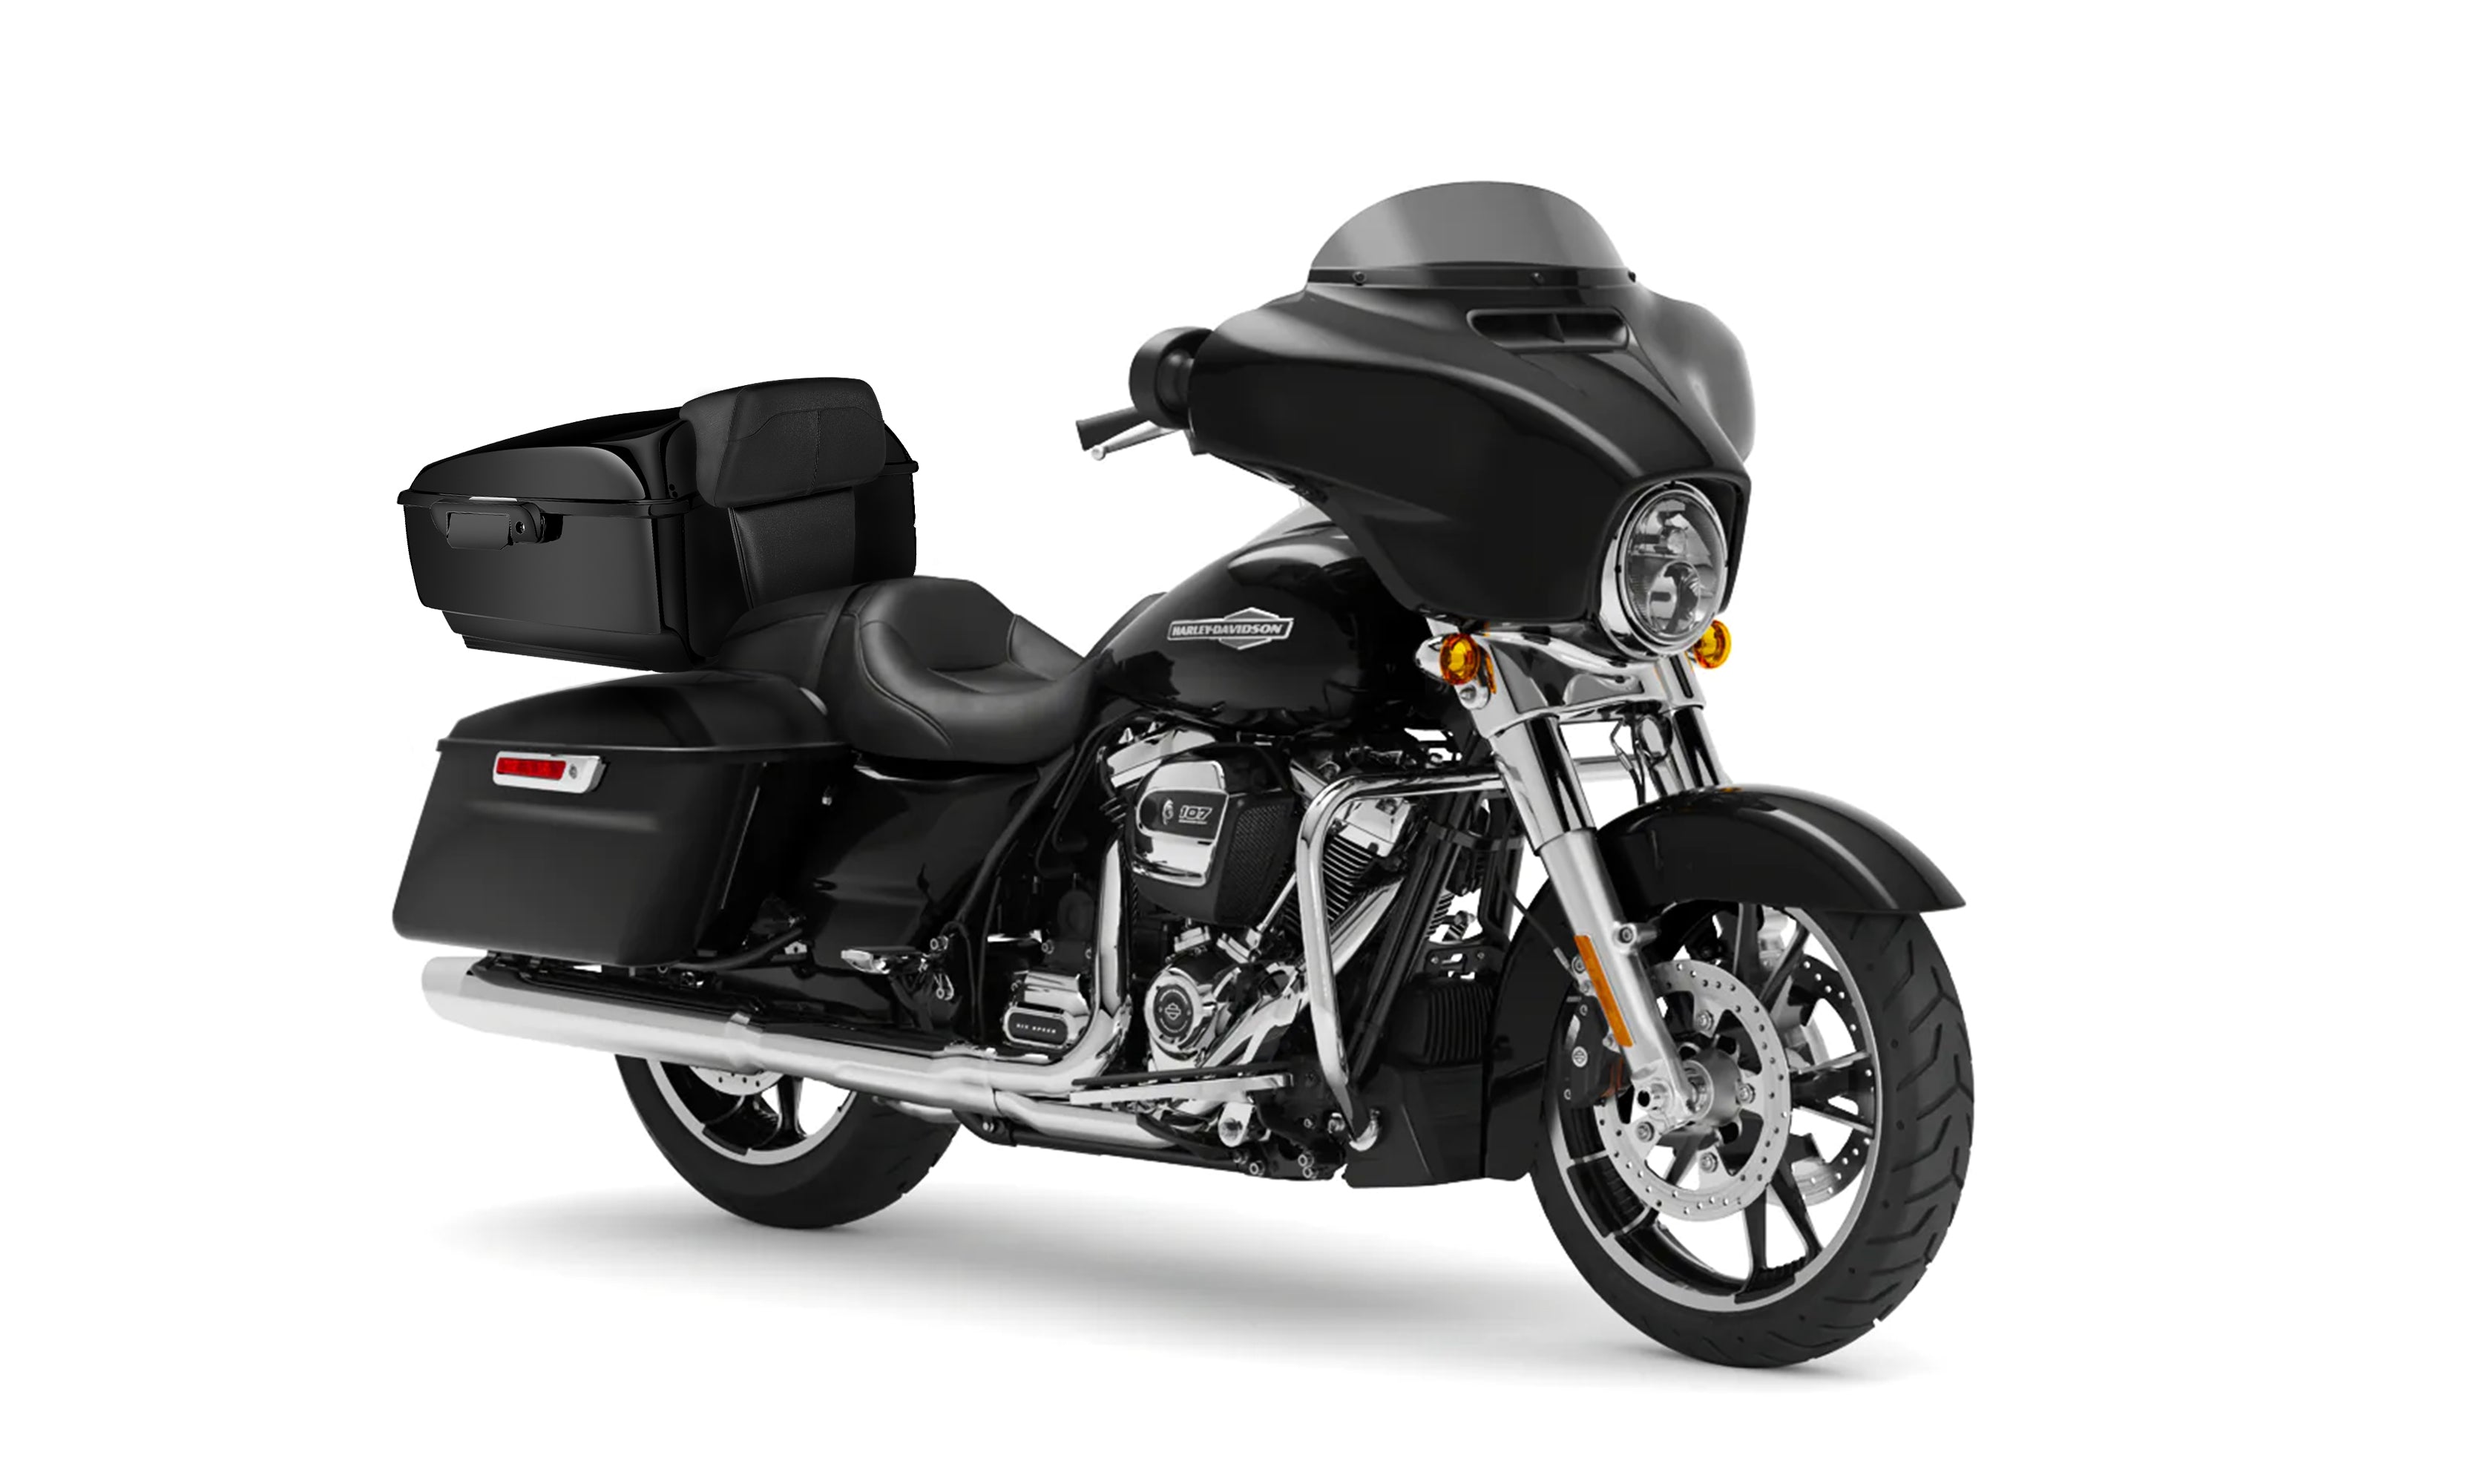 Viking Voyage Tour Pack Back Rest Pad For Harley Touring Road King Bag on Bike View @expand